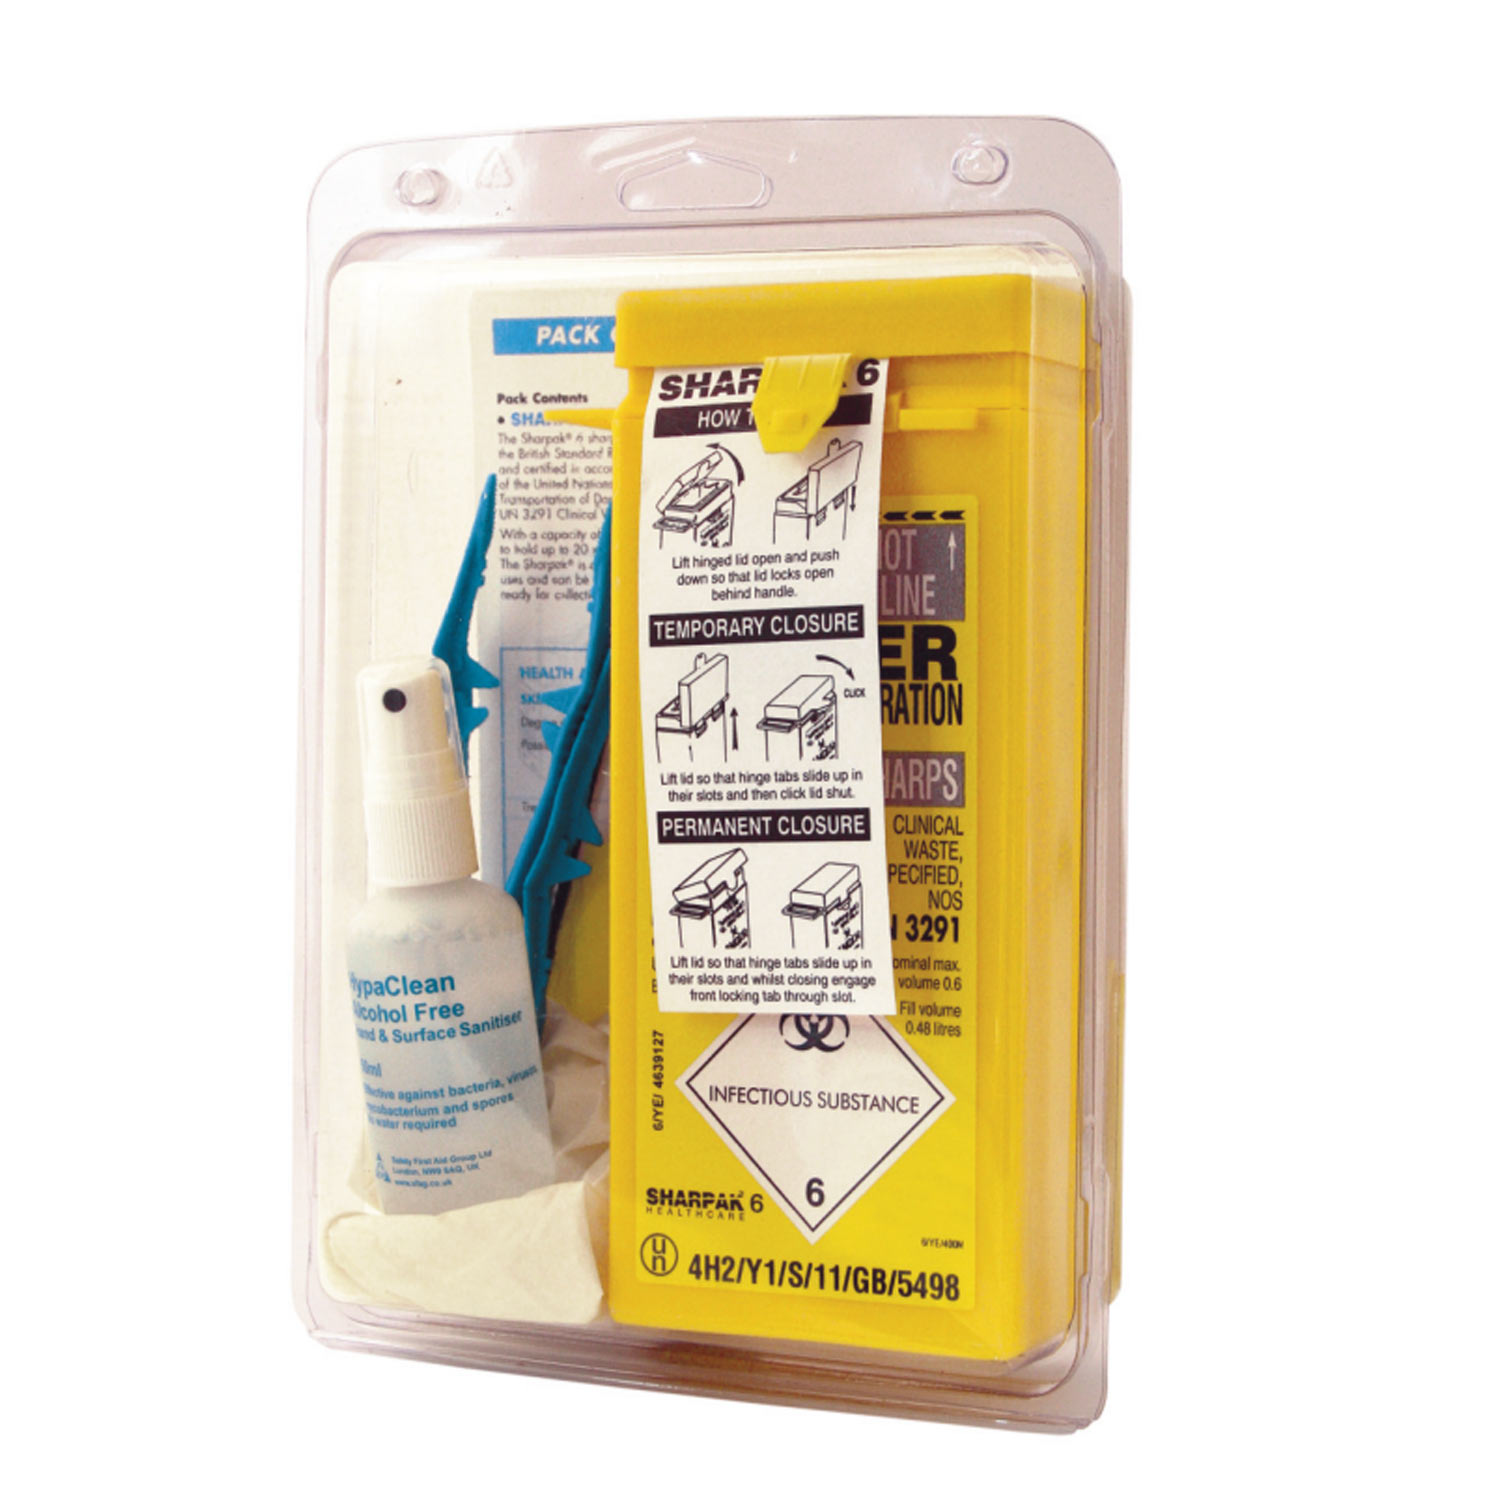 Sharpak - product - Sharps Injury Prevention Pack (SIPP)